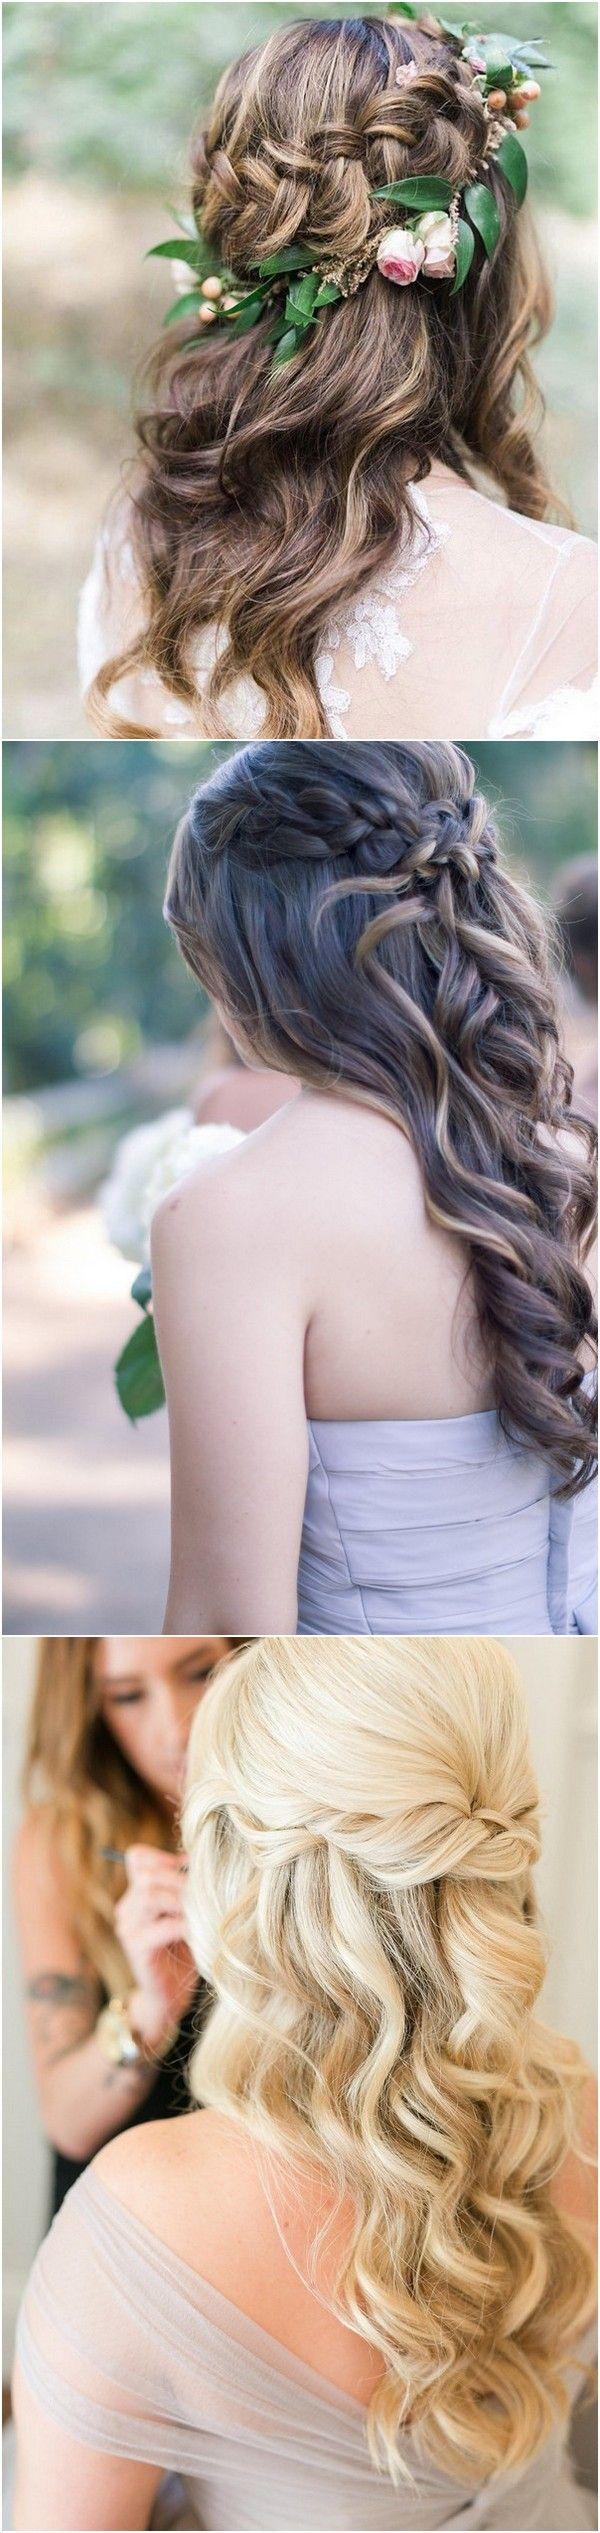 Hochzeit - 10 Glamorous Half Up Half Down Wedding Hairstyles From Hair And Makeup Girl